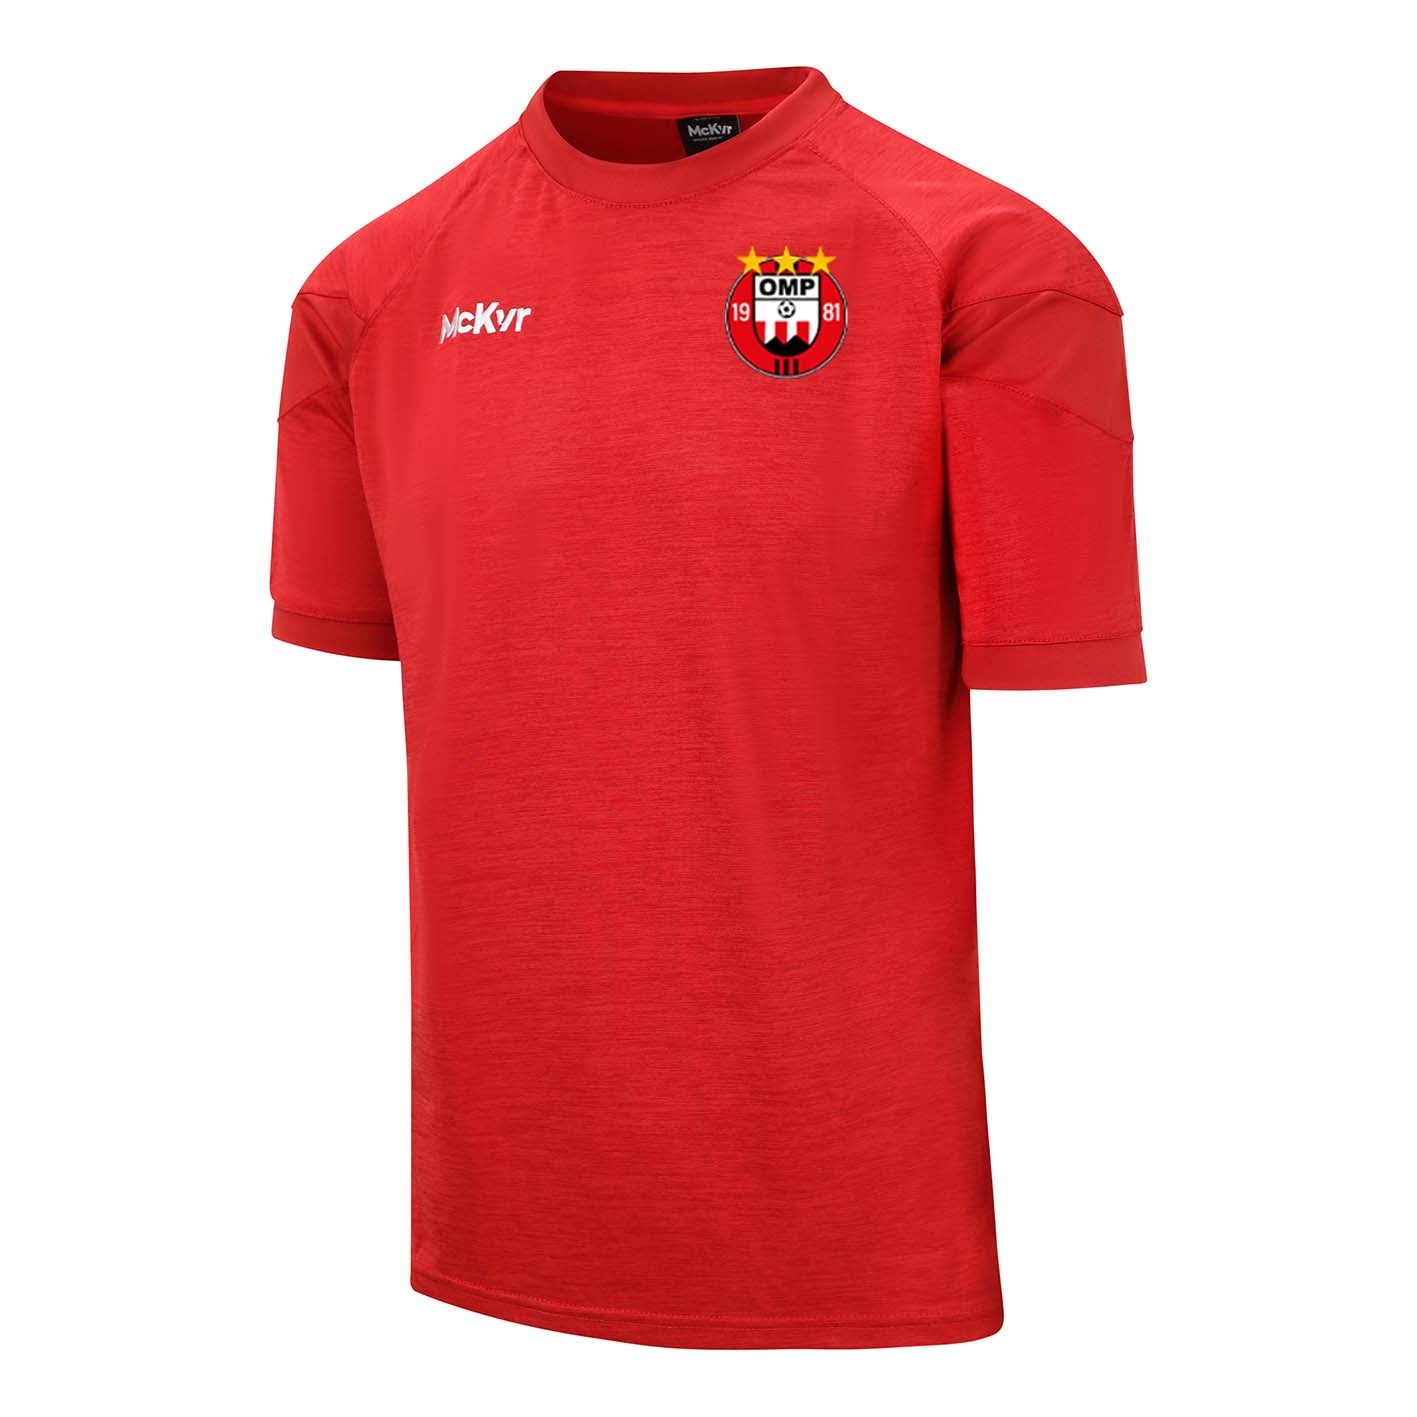 Mc Keever OMP United Core 22 T-Shirt - Adult - Red